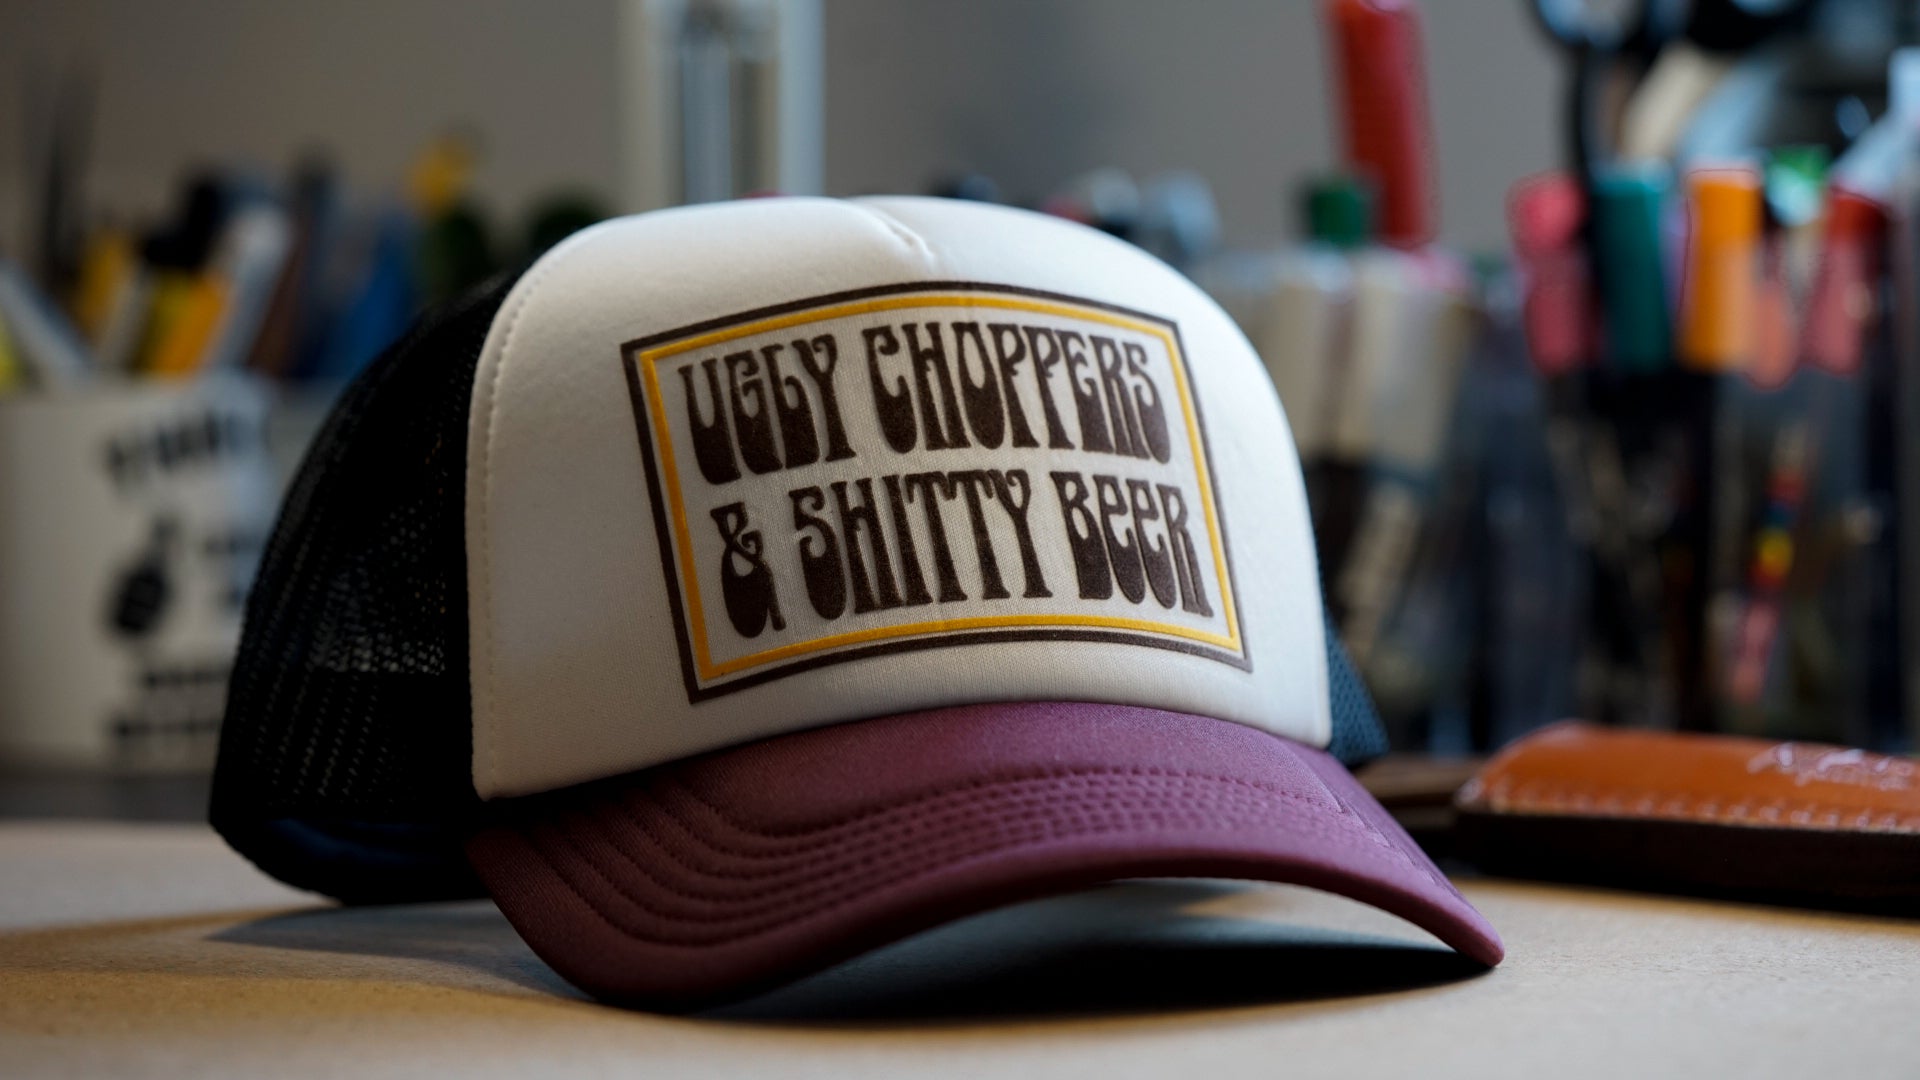 Ugly choppers & Shitty beer - trucker cap